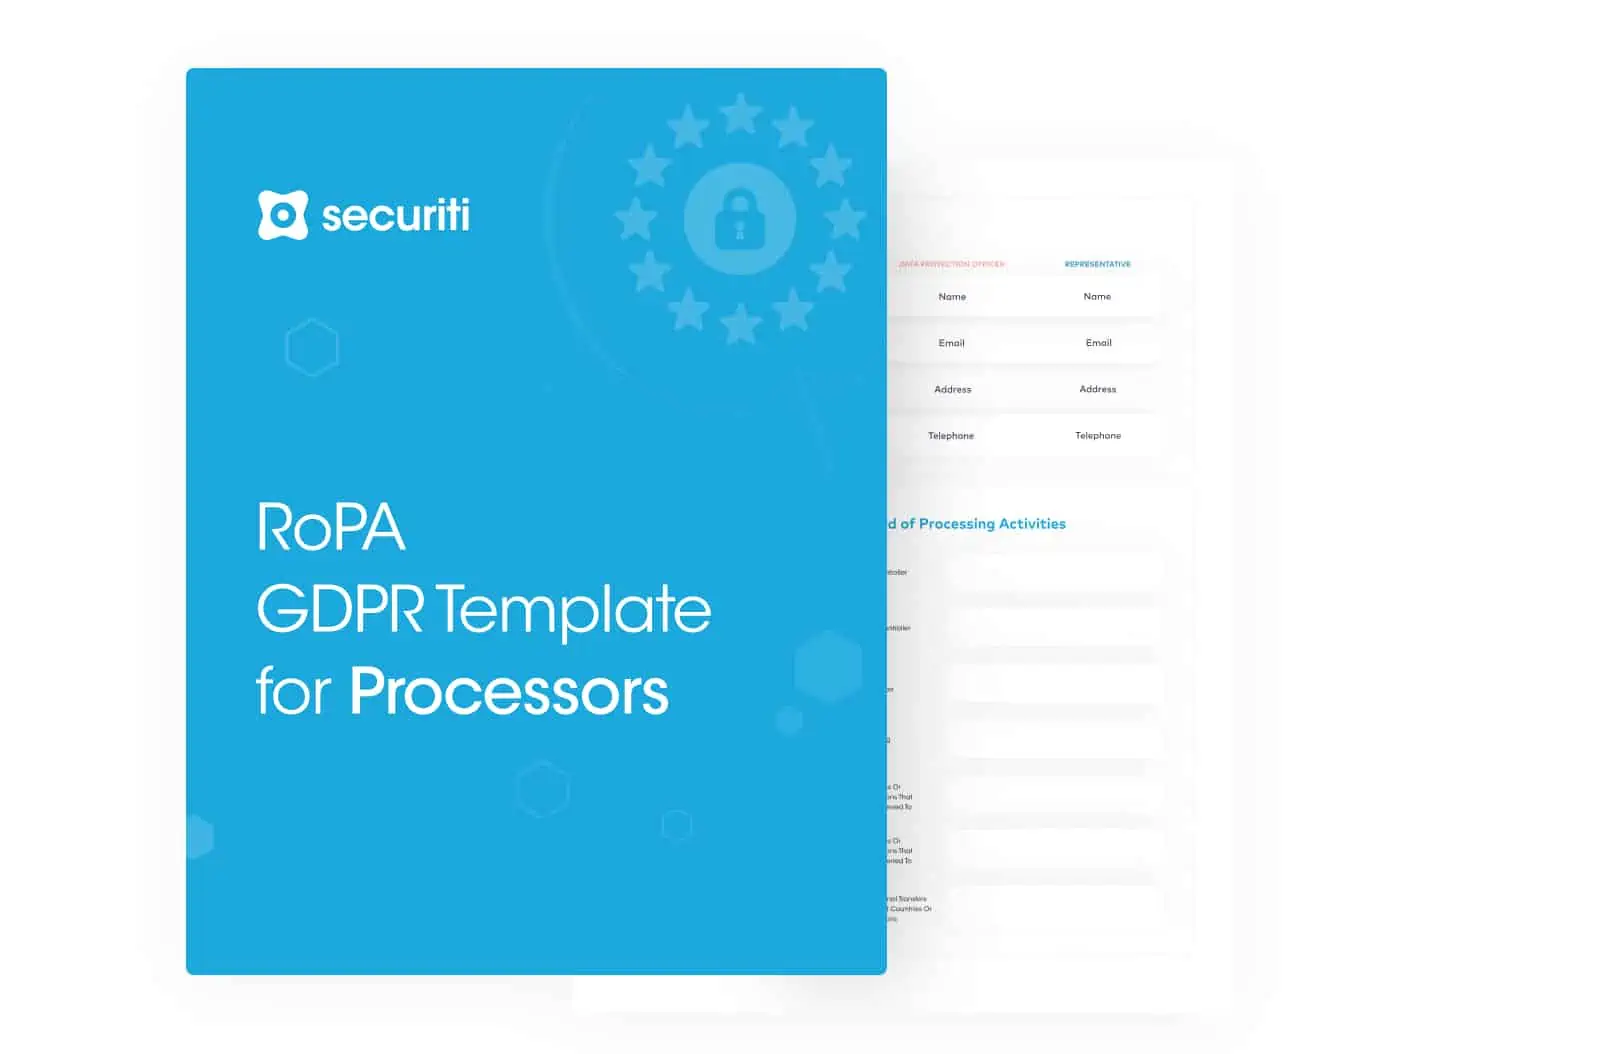 RoPA GDPR Template for Processors